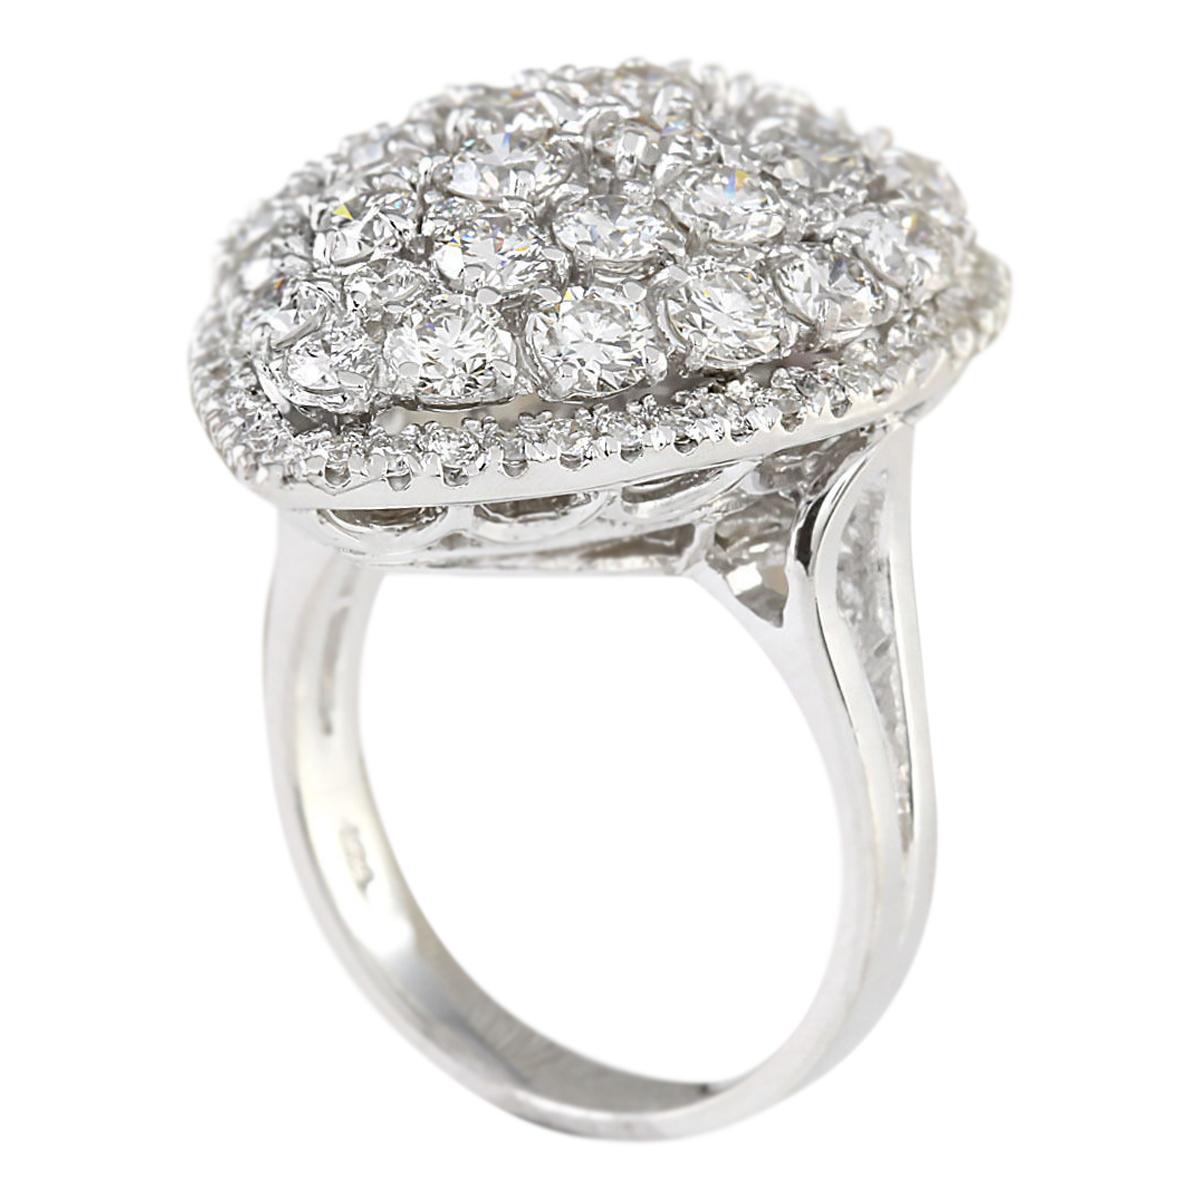 4.50 Carat Diamond 18 Karat White Gold Ring In New Condition For Sale In Los Angeles, CA